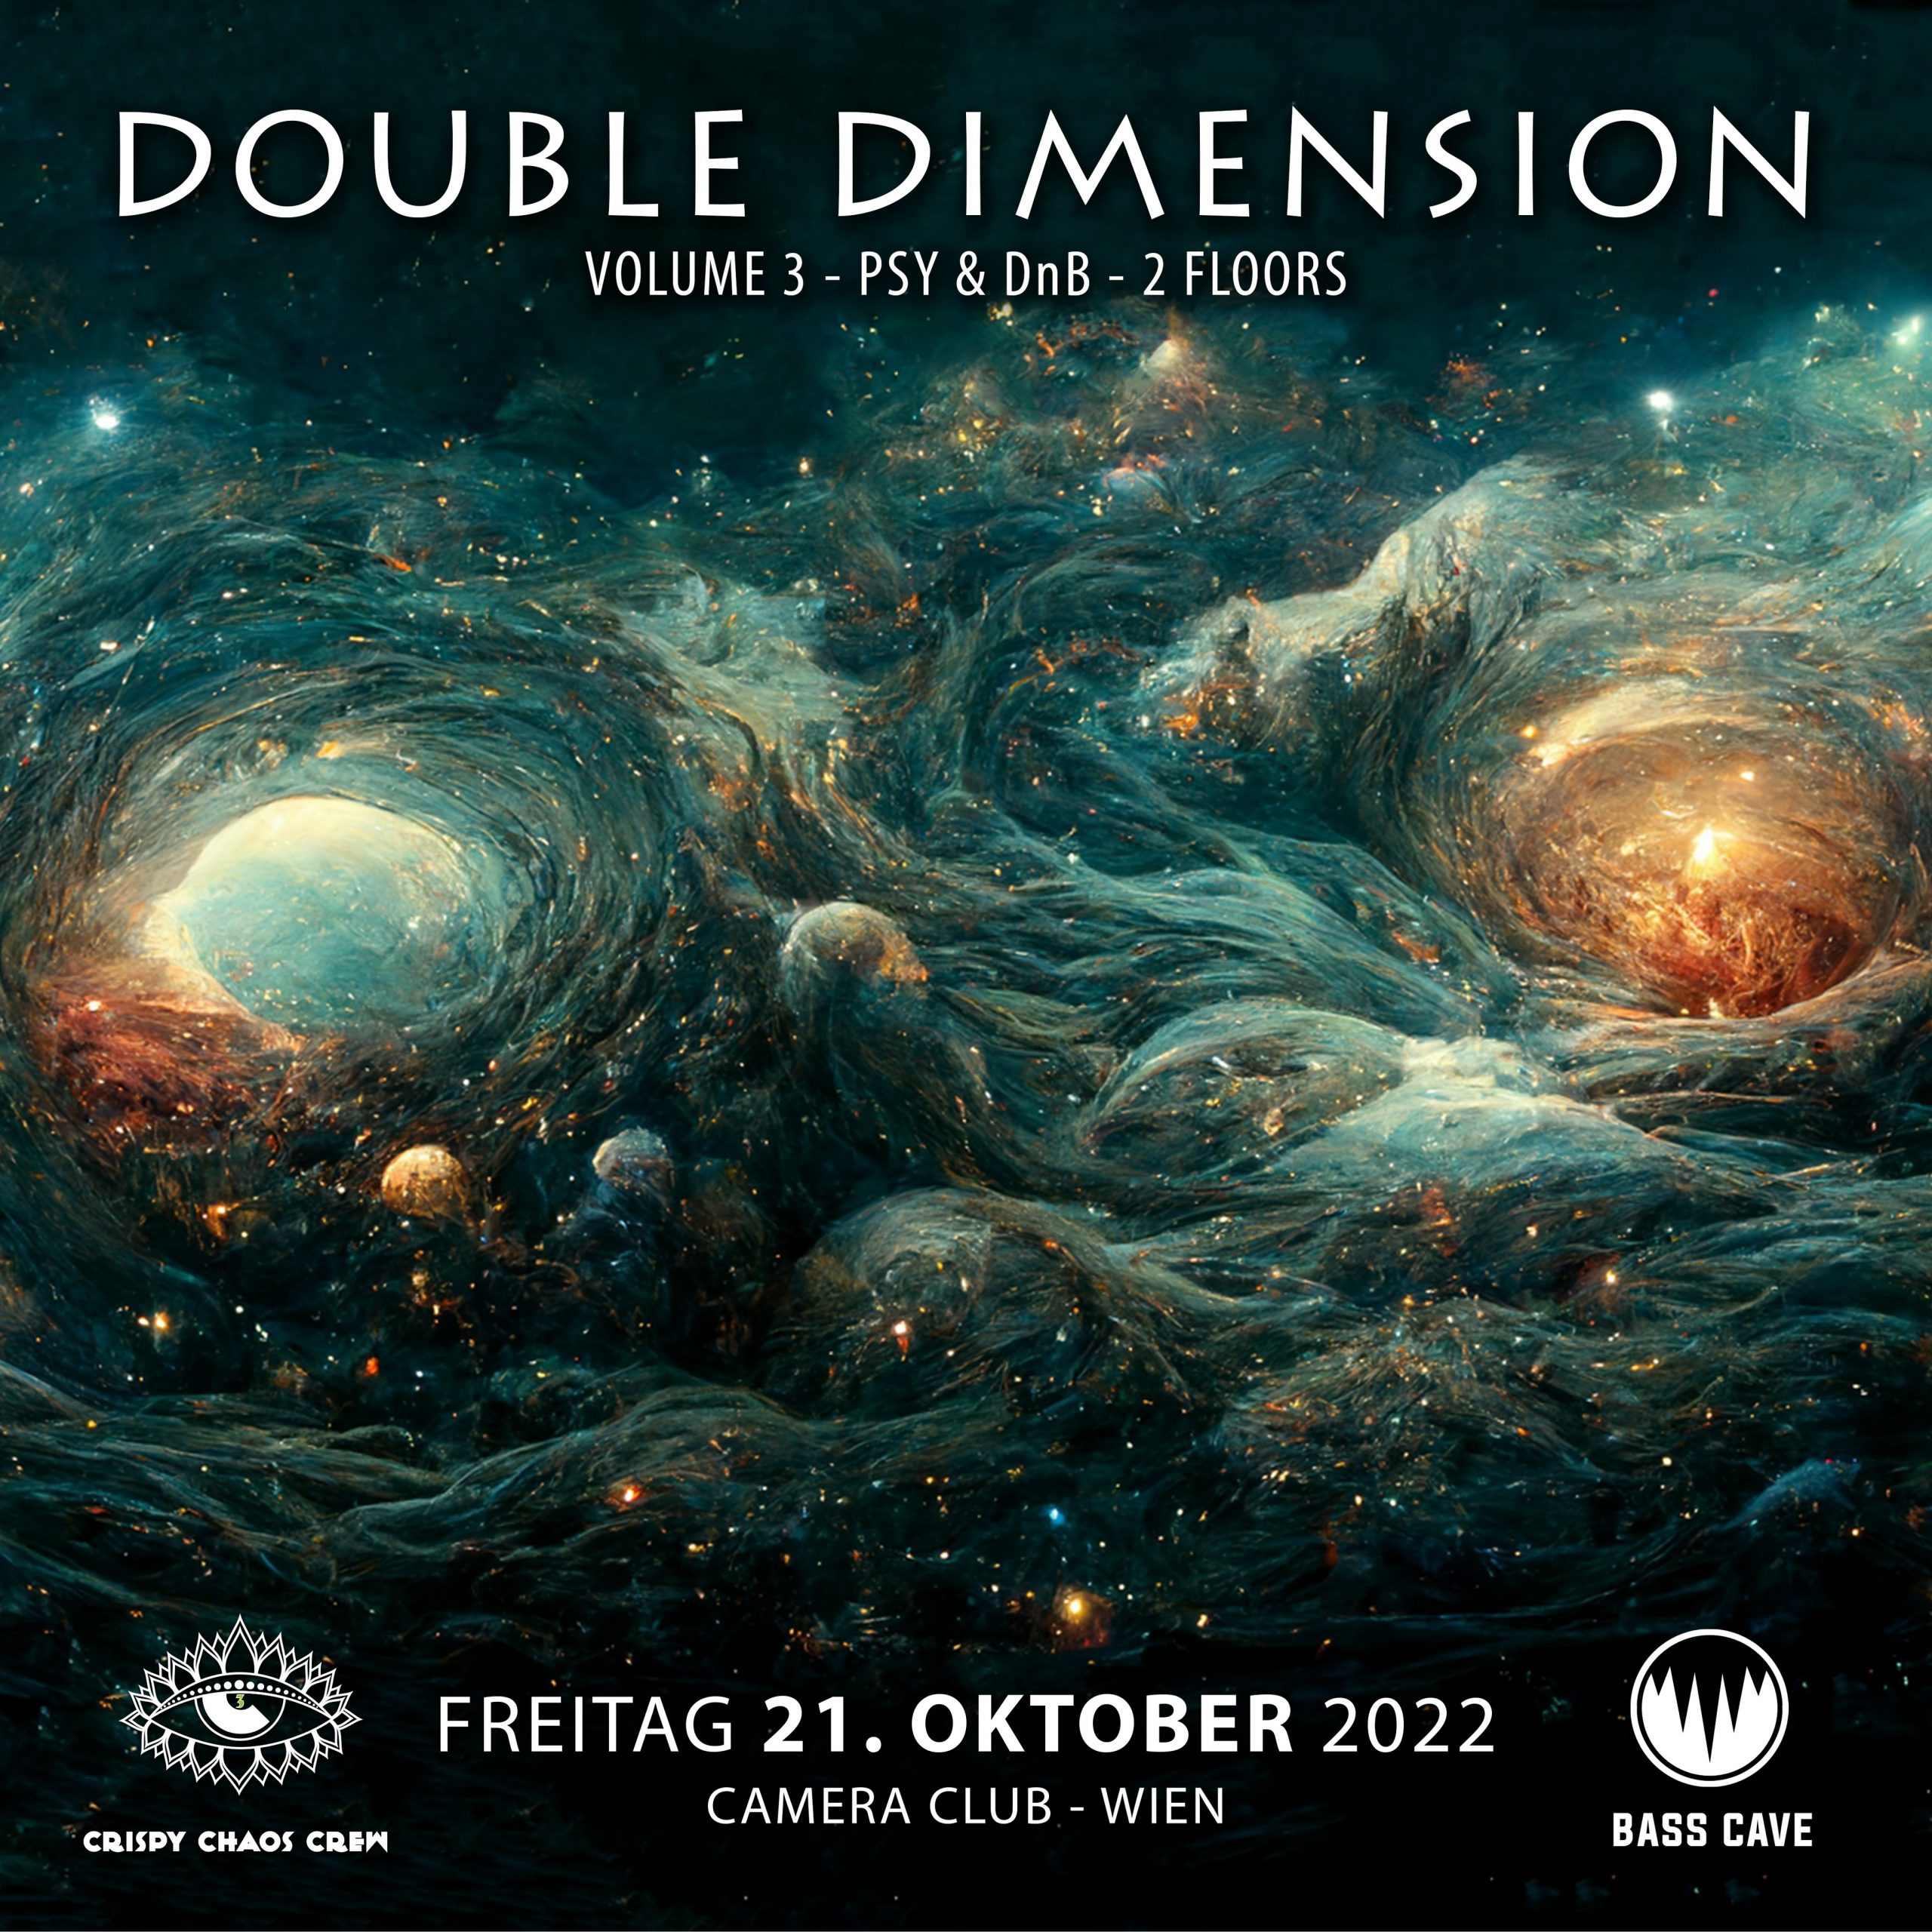 Double Dimension - Crispy Chaos Crew und Bass Cave am 21. October 2022 @ Camera Club.